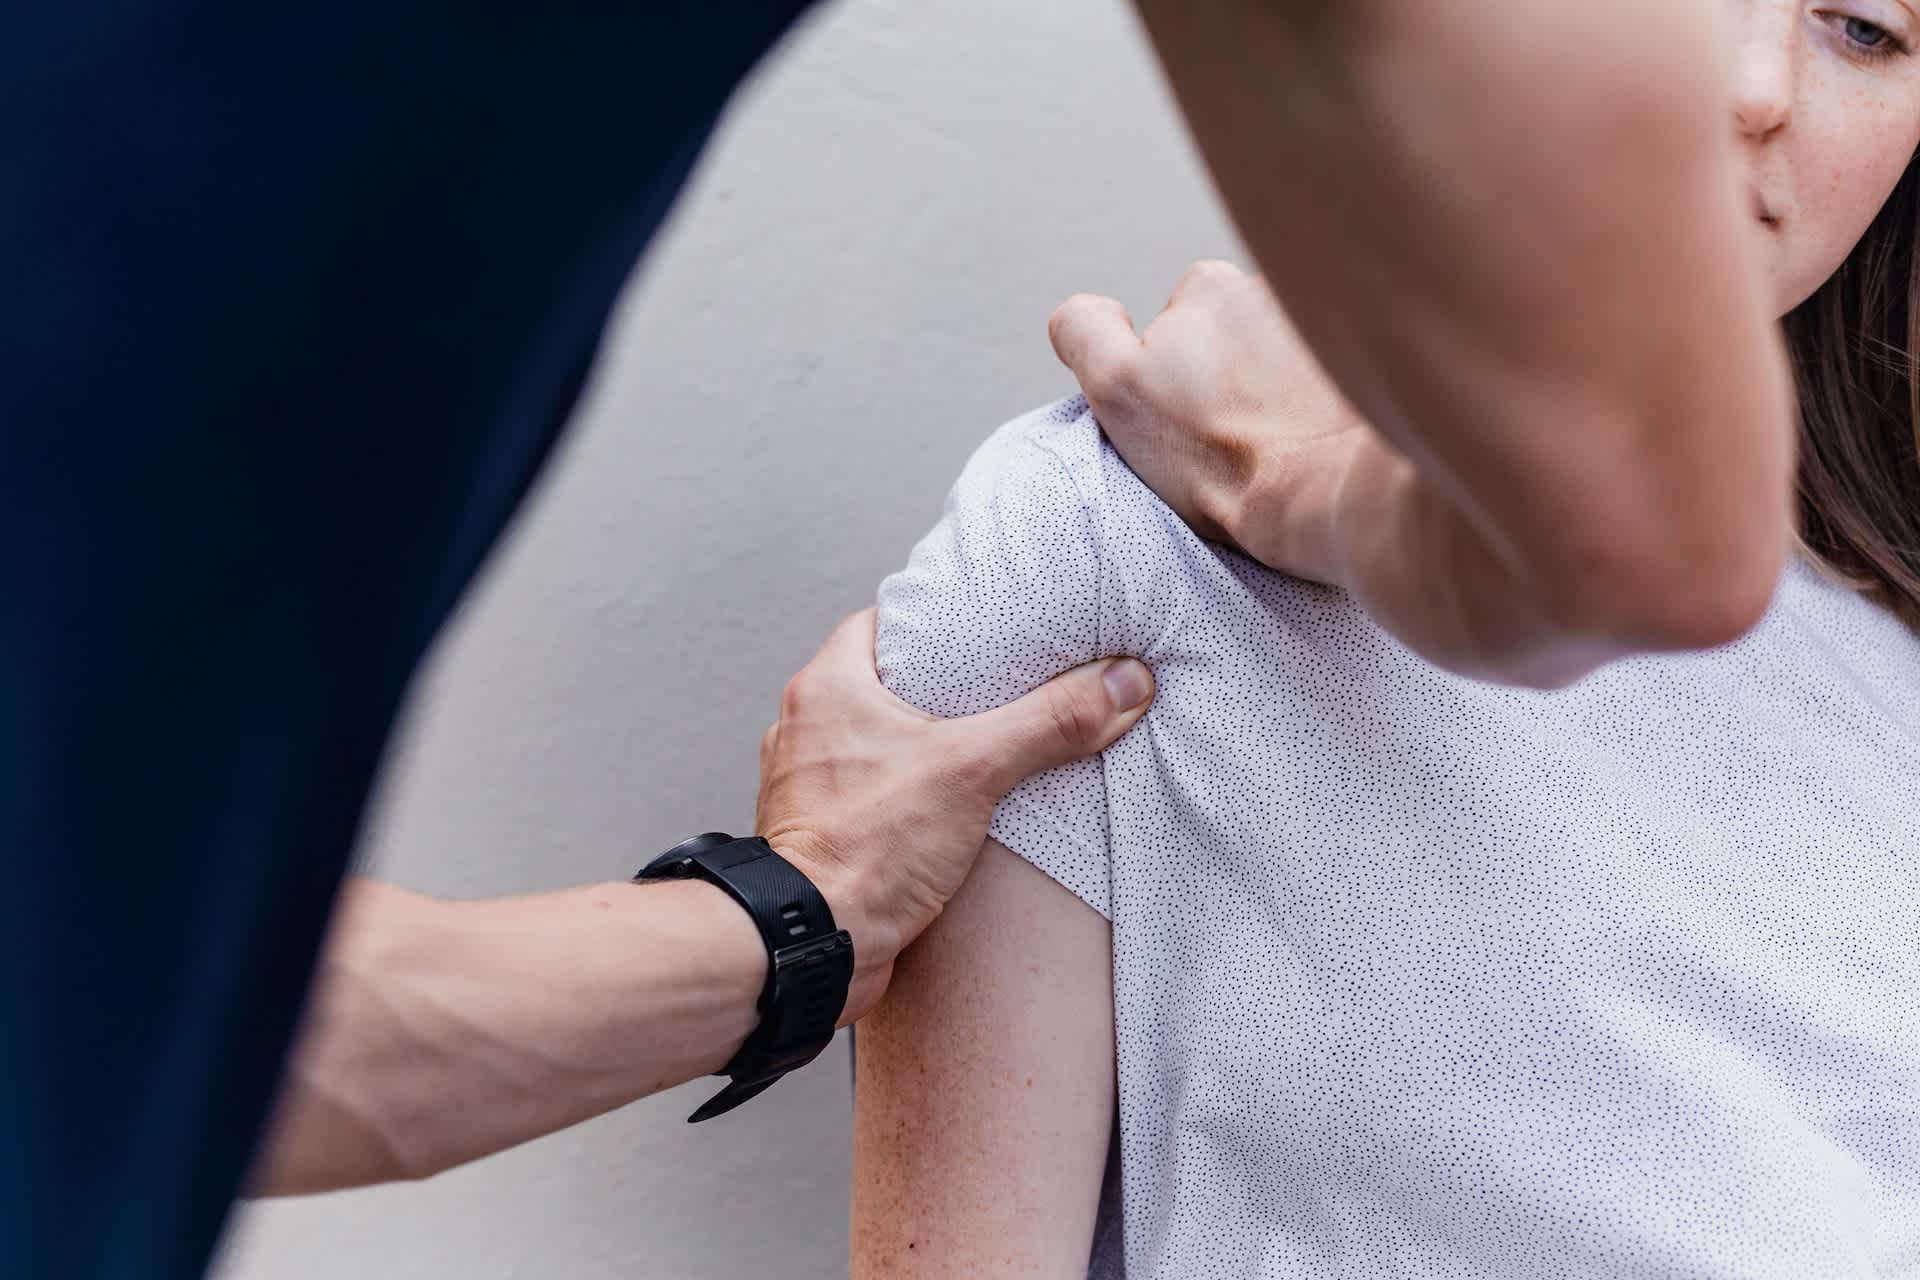 Physio working on a woman's shoulder